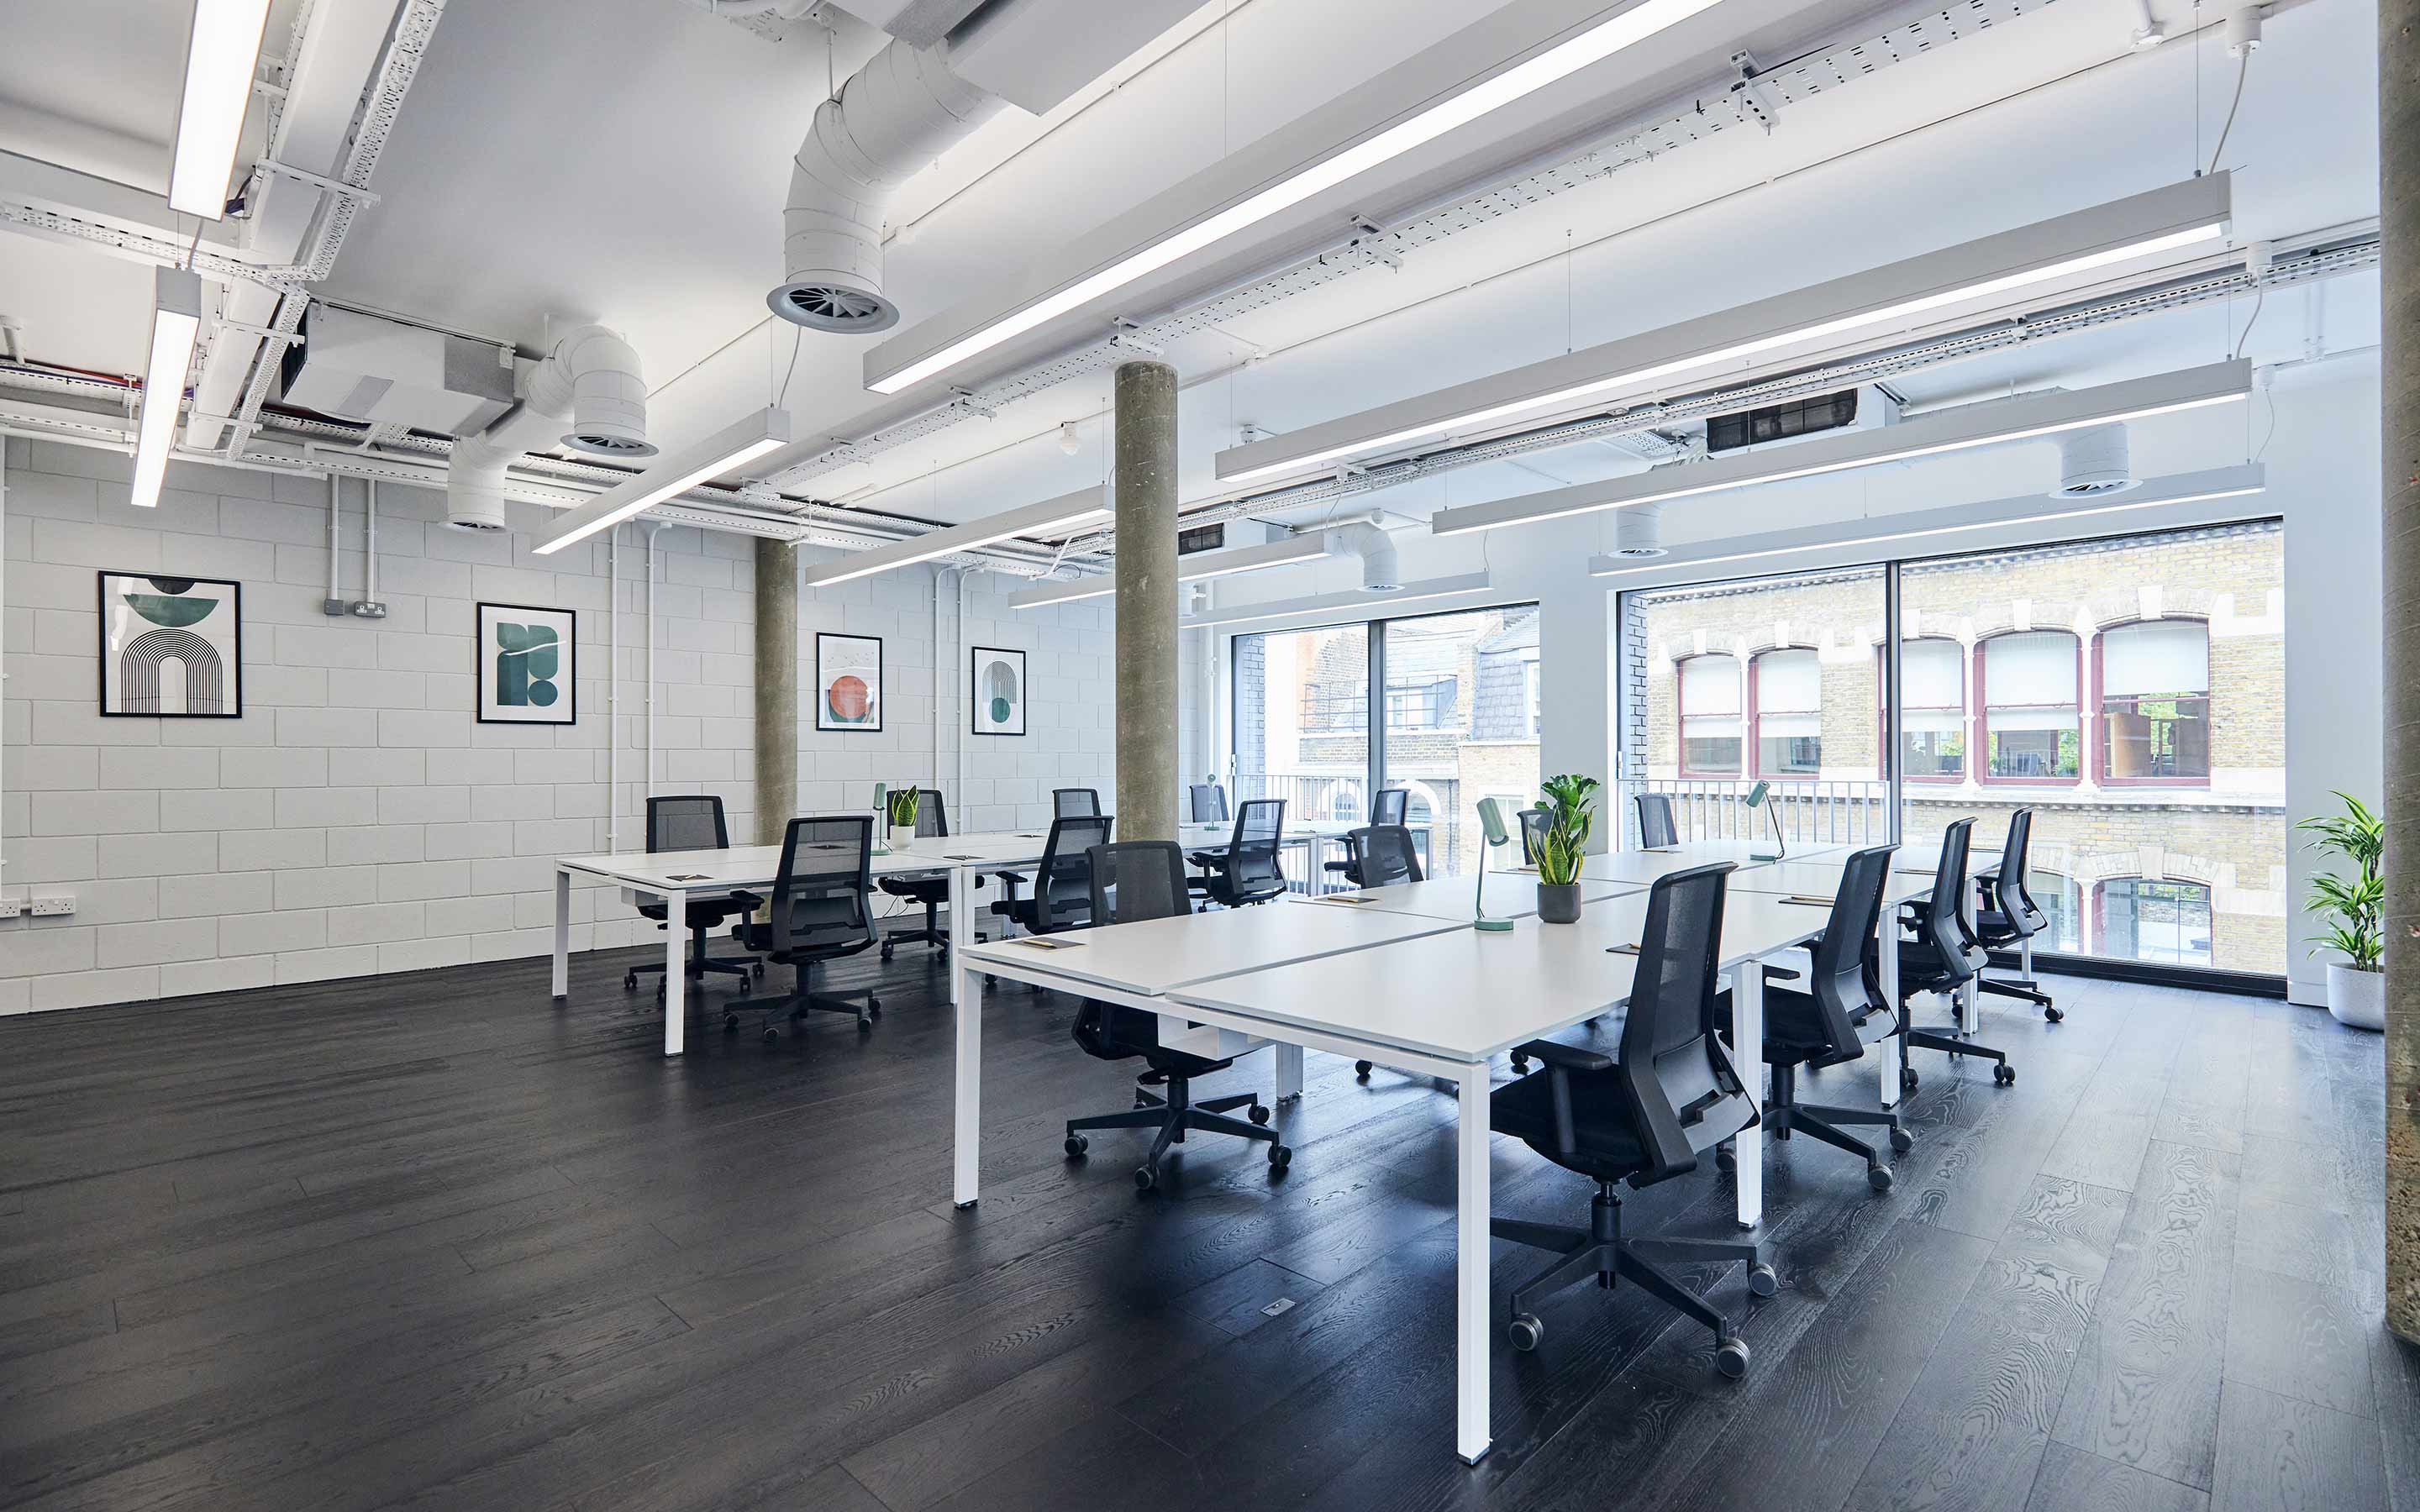 The image shows an open plan office, with artwork on the walls, linear ceiling lighting, and white walls